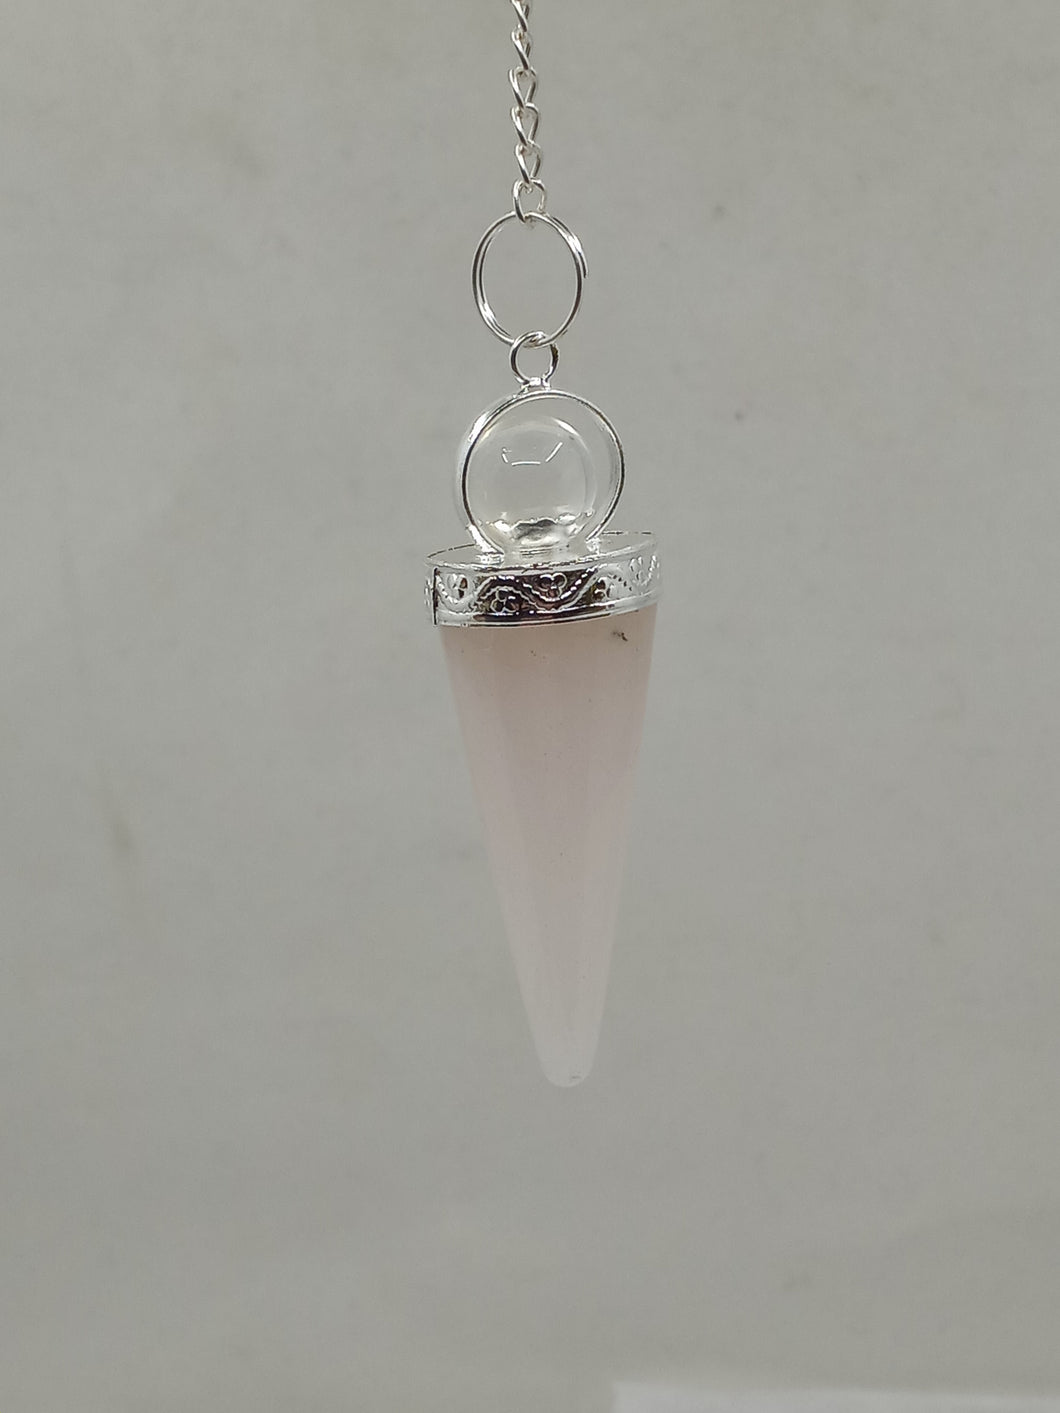 A Rose Quartz 2 pc Pendulum with a faceted point. The pendulum hangs from a silver chain.